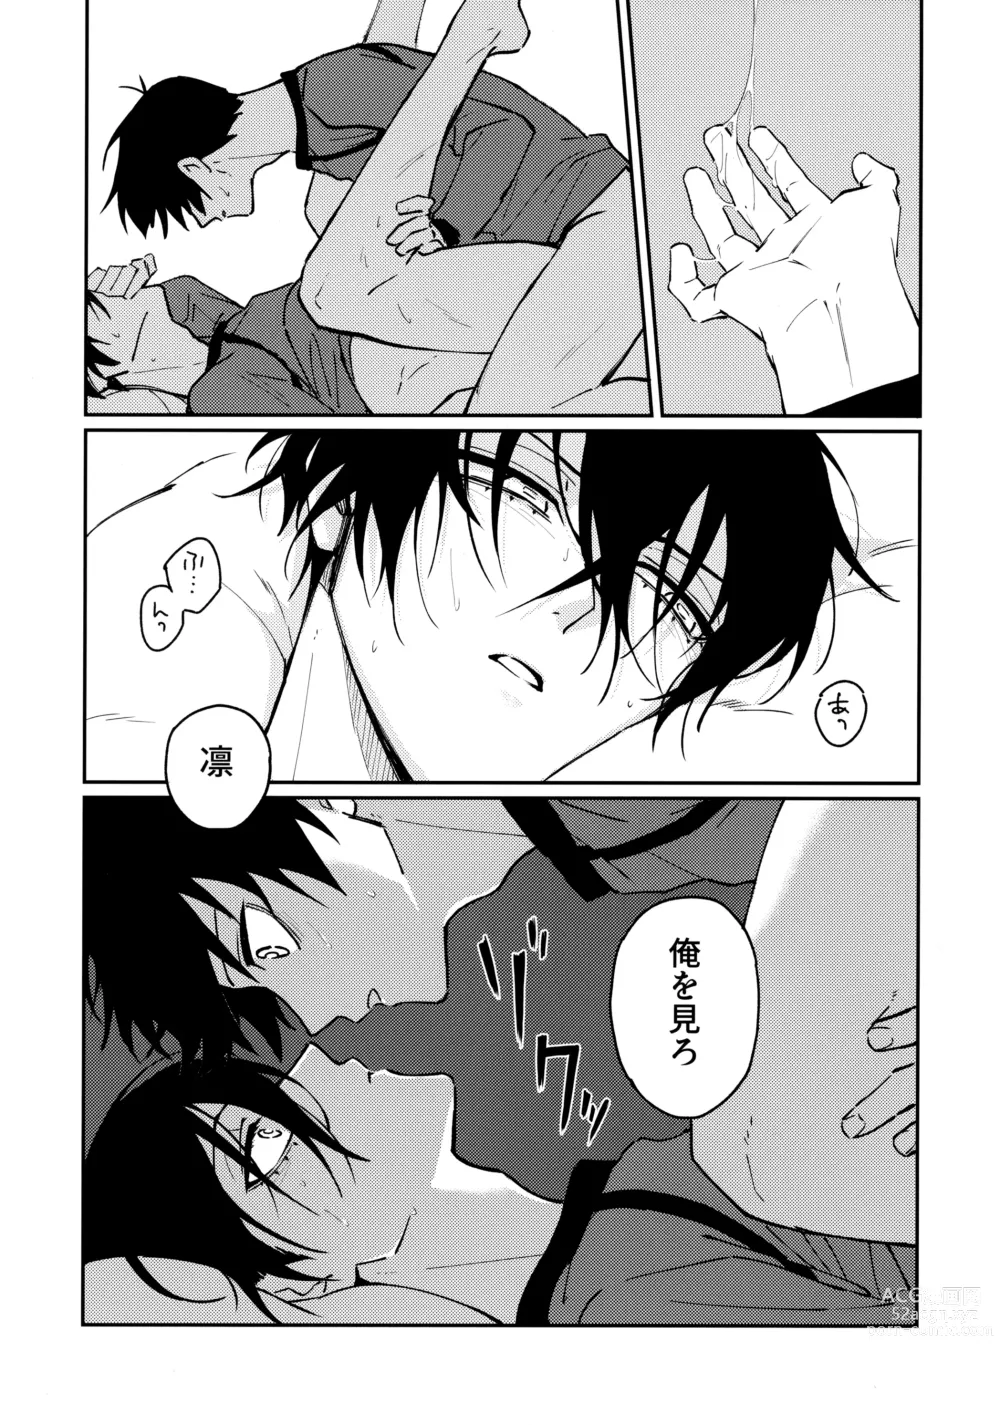 Page 24 of doujinshi Tonight the World is Ours